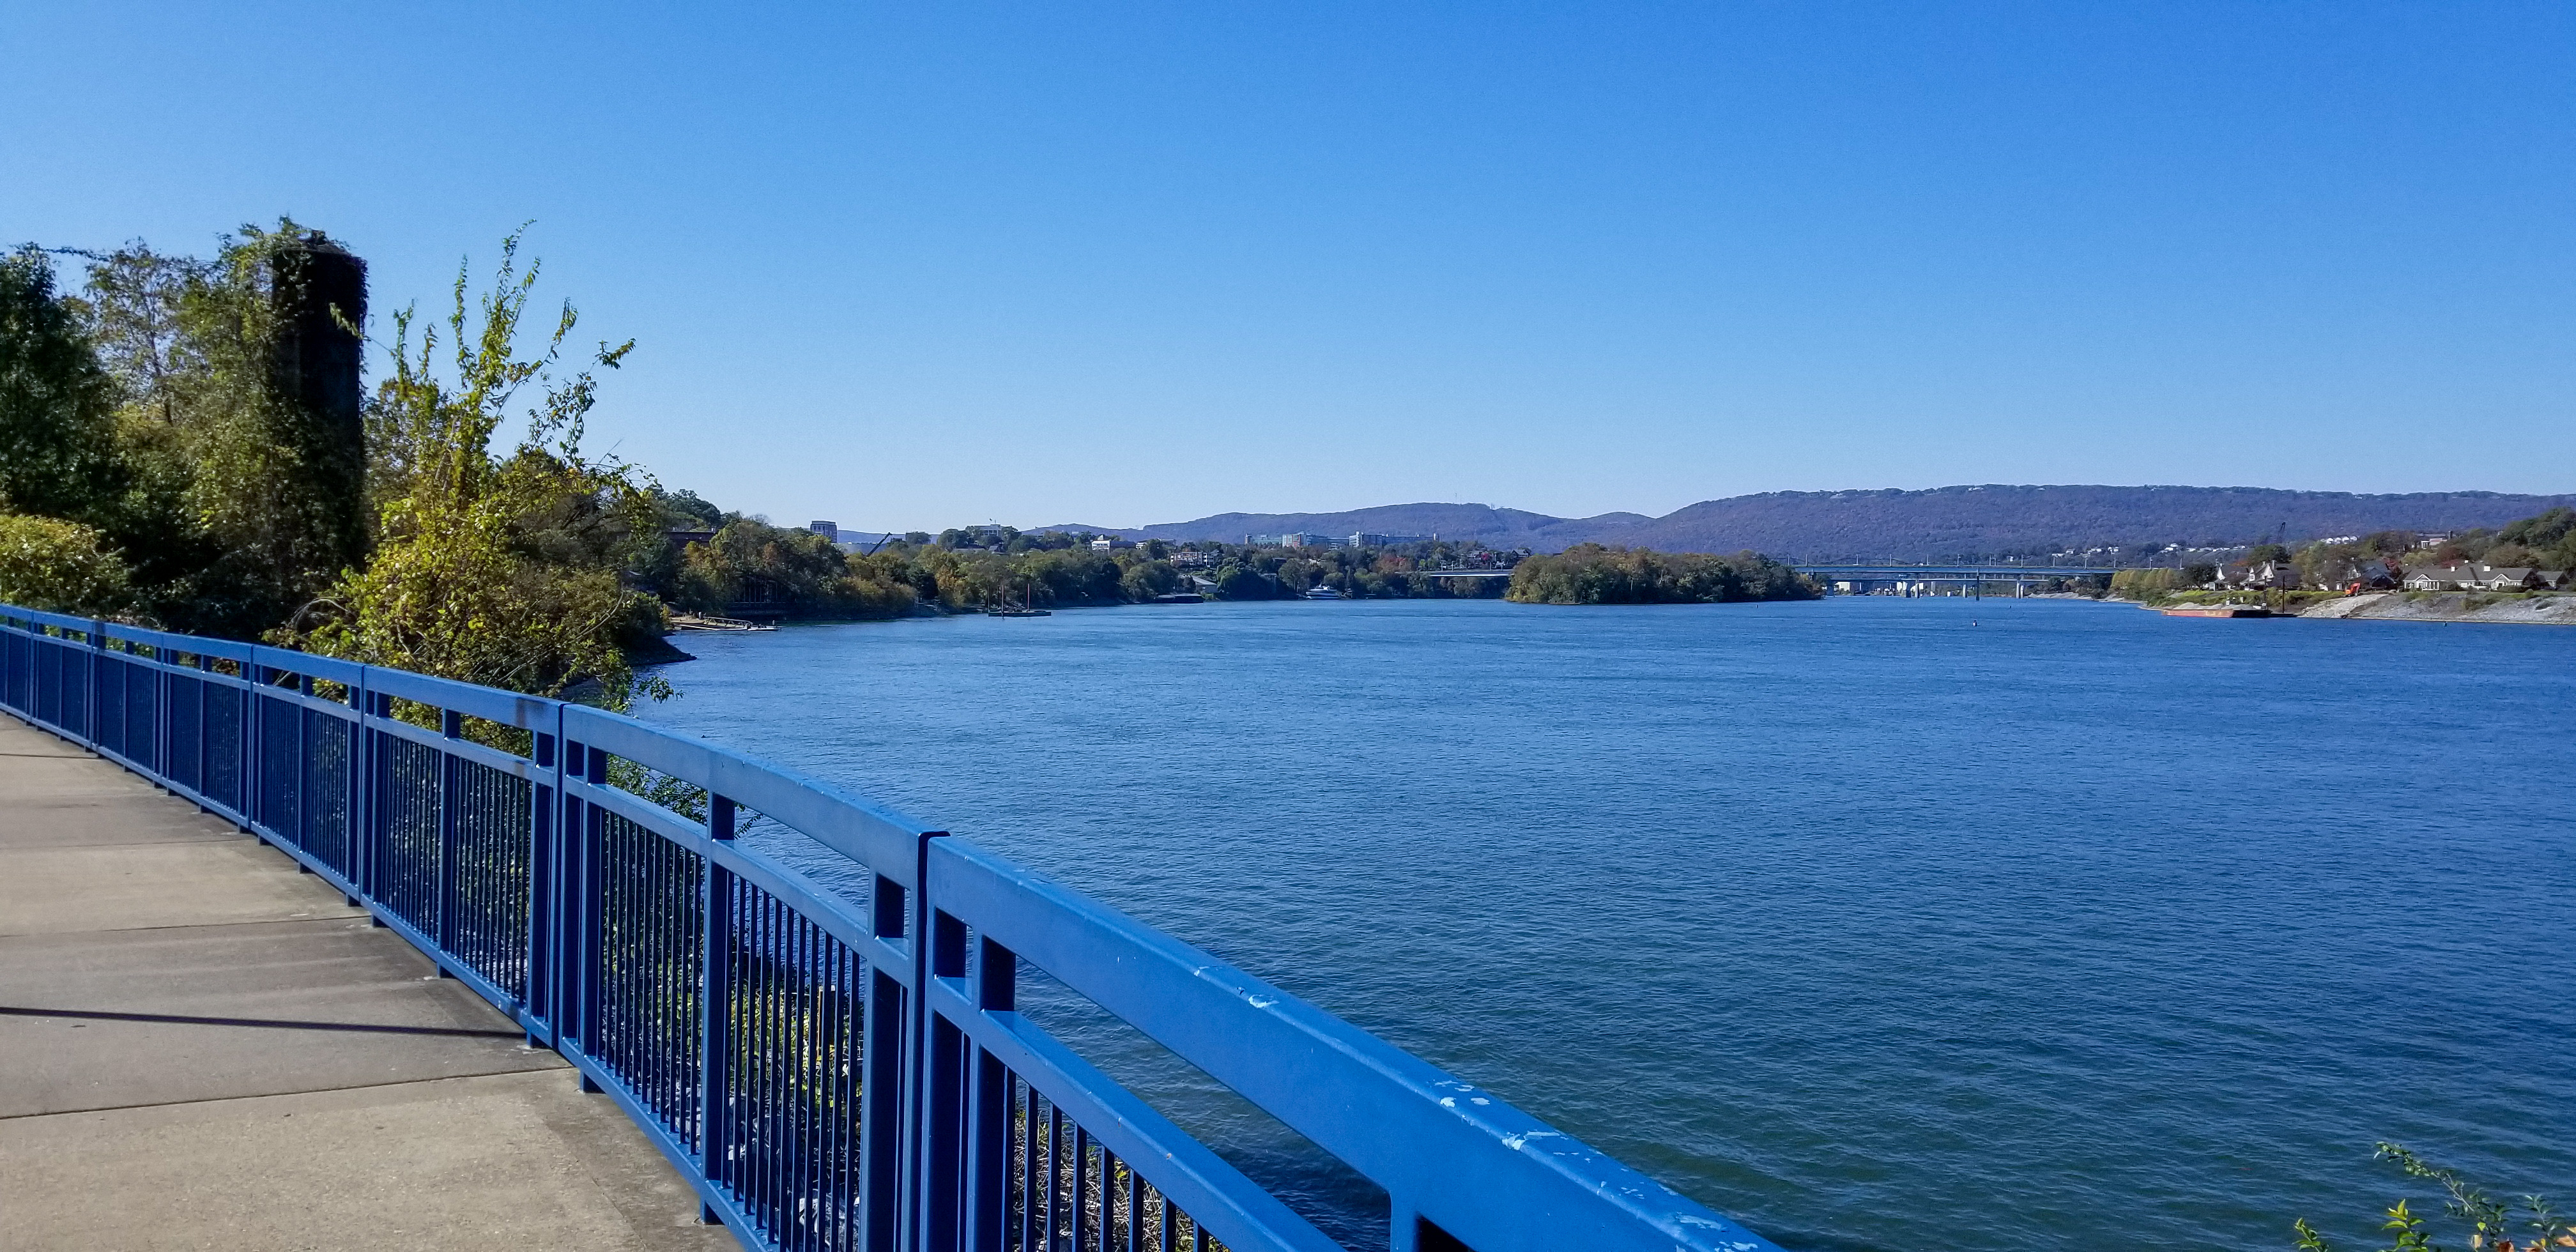 bike riding in chattanooga